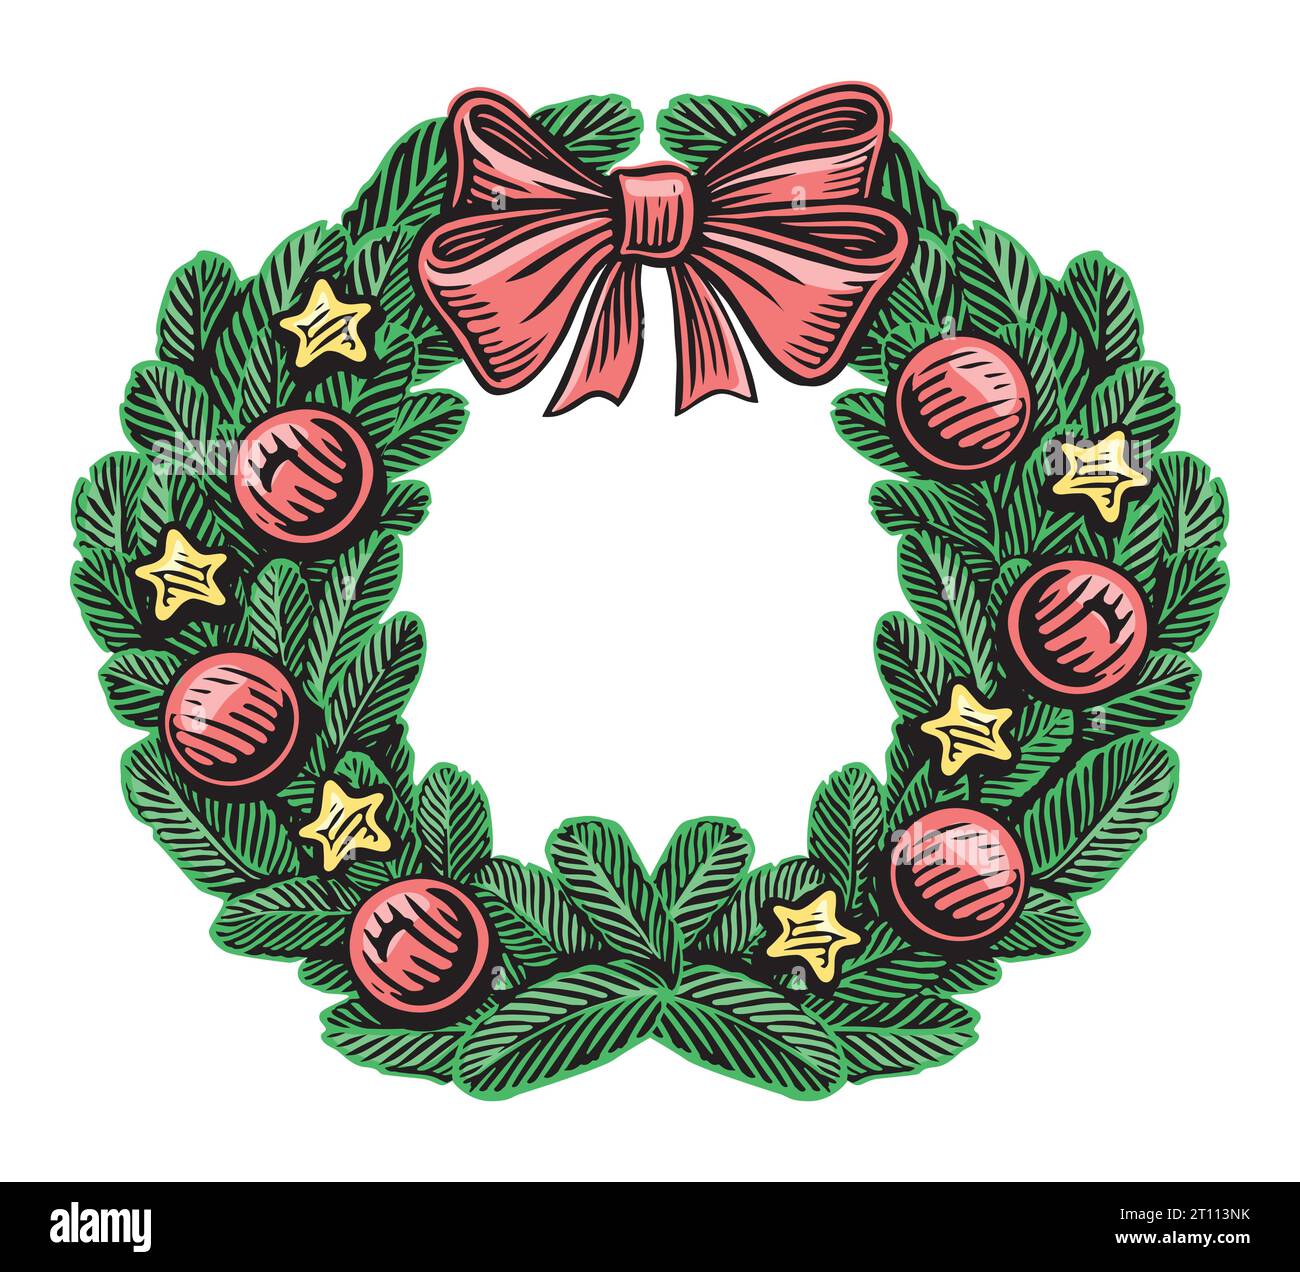 Christmas Wreath with fir branches, balls and bow isolated. Holiday symbol vector illustration Stock Vector